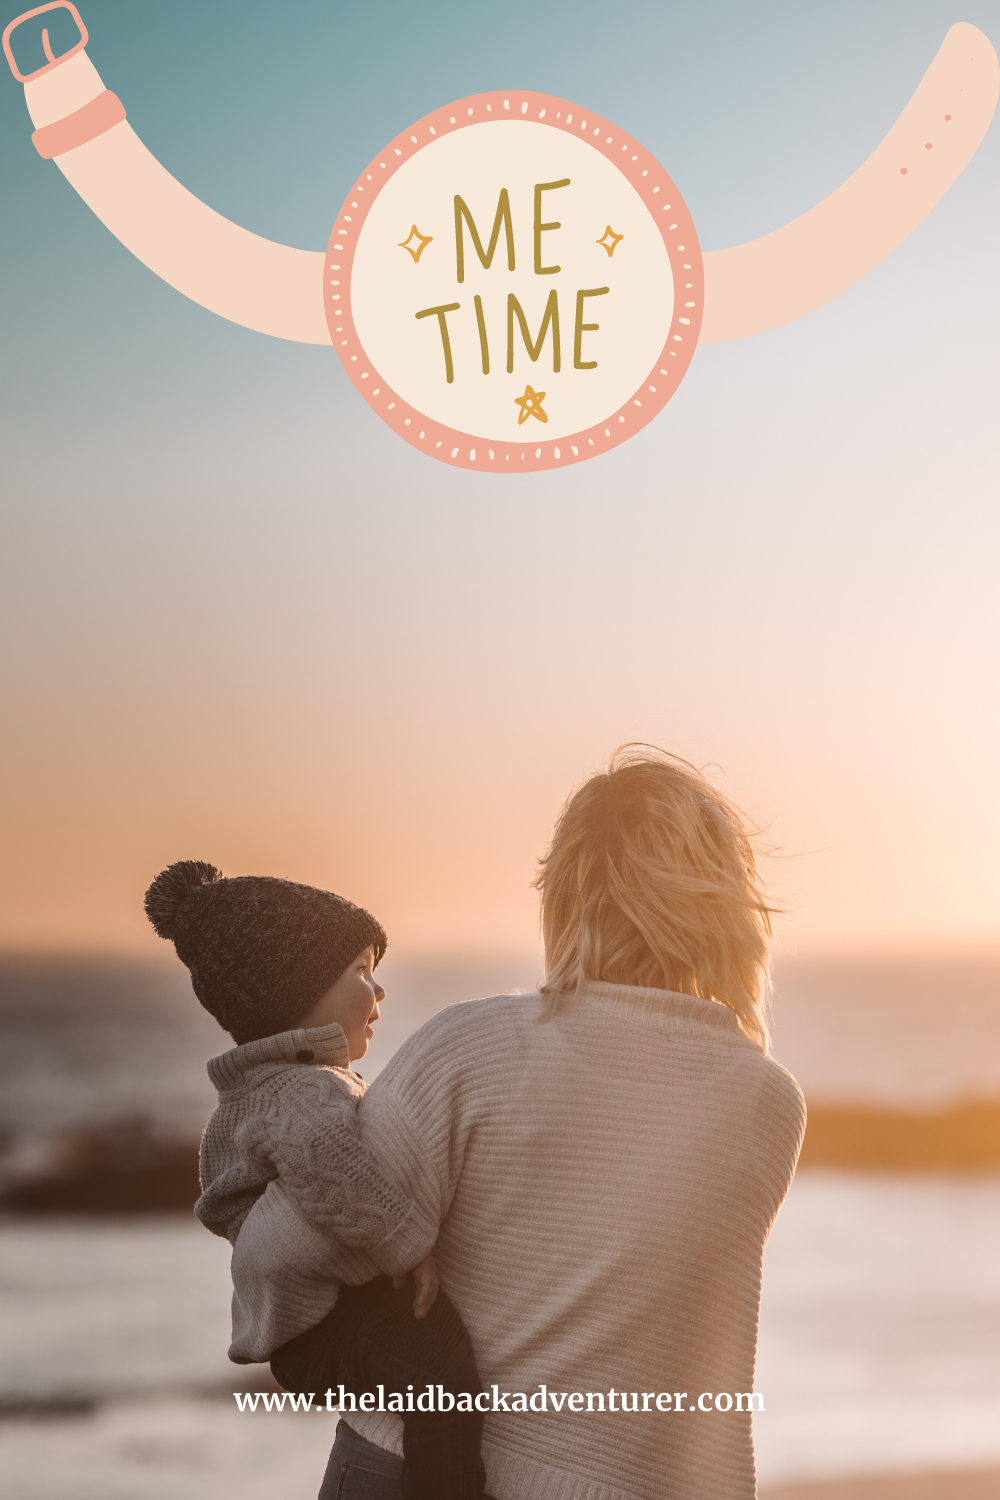 To the new mom who can’t find time for herself